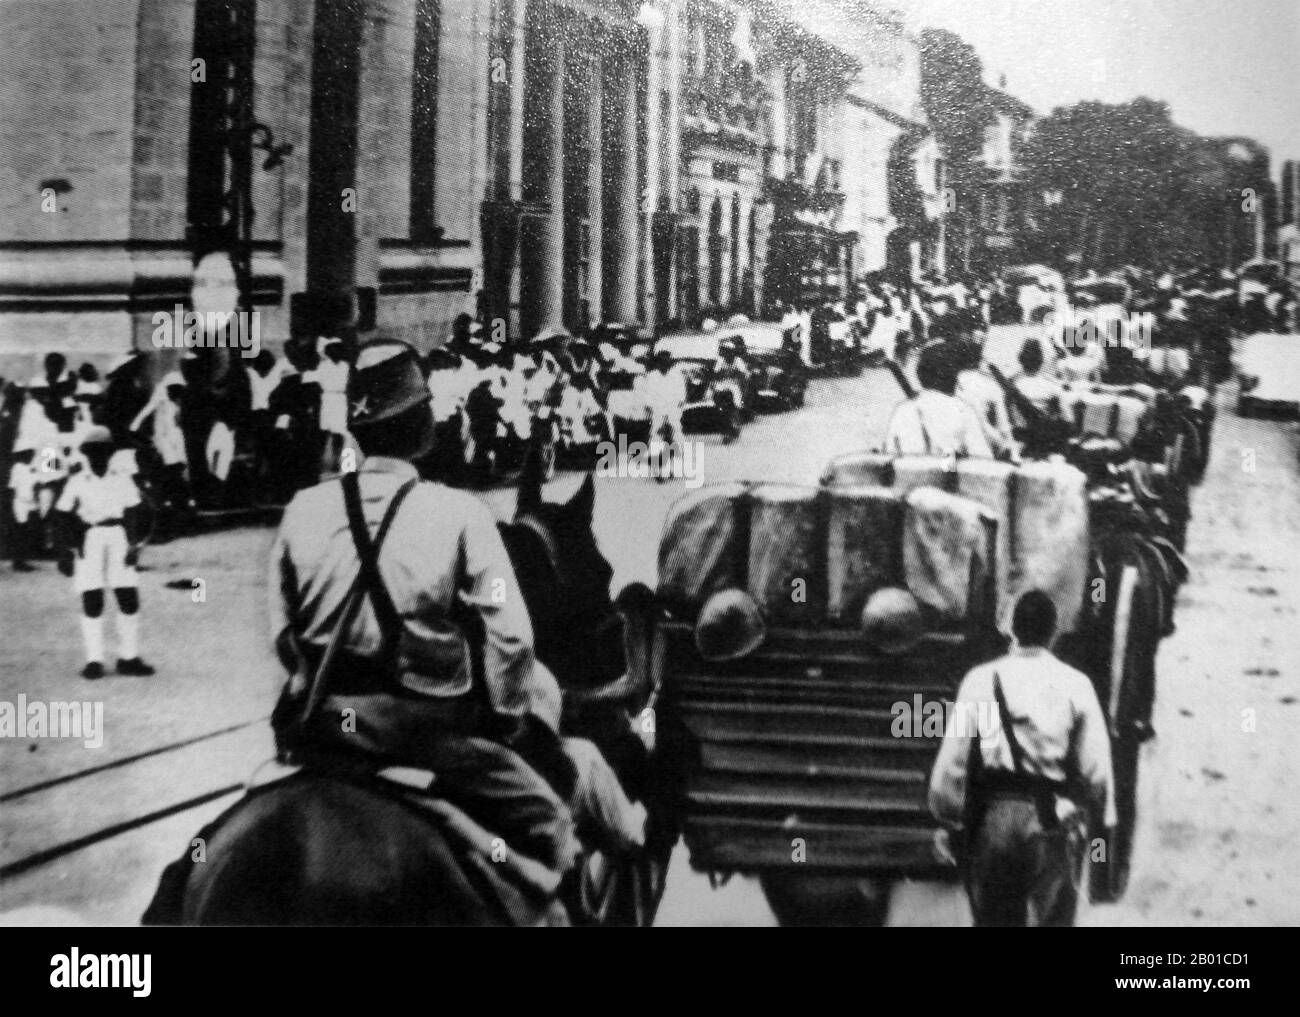 Vietnam: Japanese troops entering Saigon, French Indochina, 1941.  In September 1940, during World War II, the newly created regime of Vichy France granted Japan's demands for military access to Tonkin with the invasion of French Indochina (or Vietnam Expedition). This allowed Japan better access to China in the Second Sino-Japanese War against the forces of Chiang Kai-shek, but it was also part of Japan's strategy for dominion over the Greater East Asia Co-Prosperity Sphere. Stock Photo